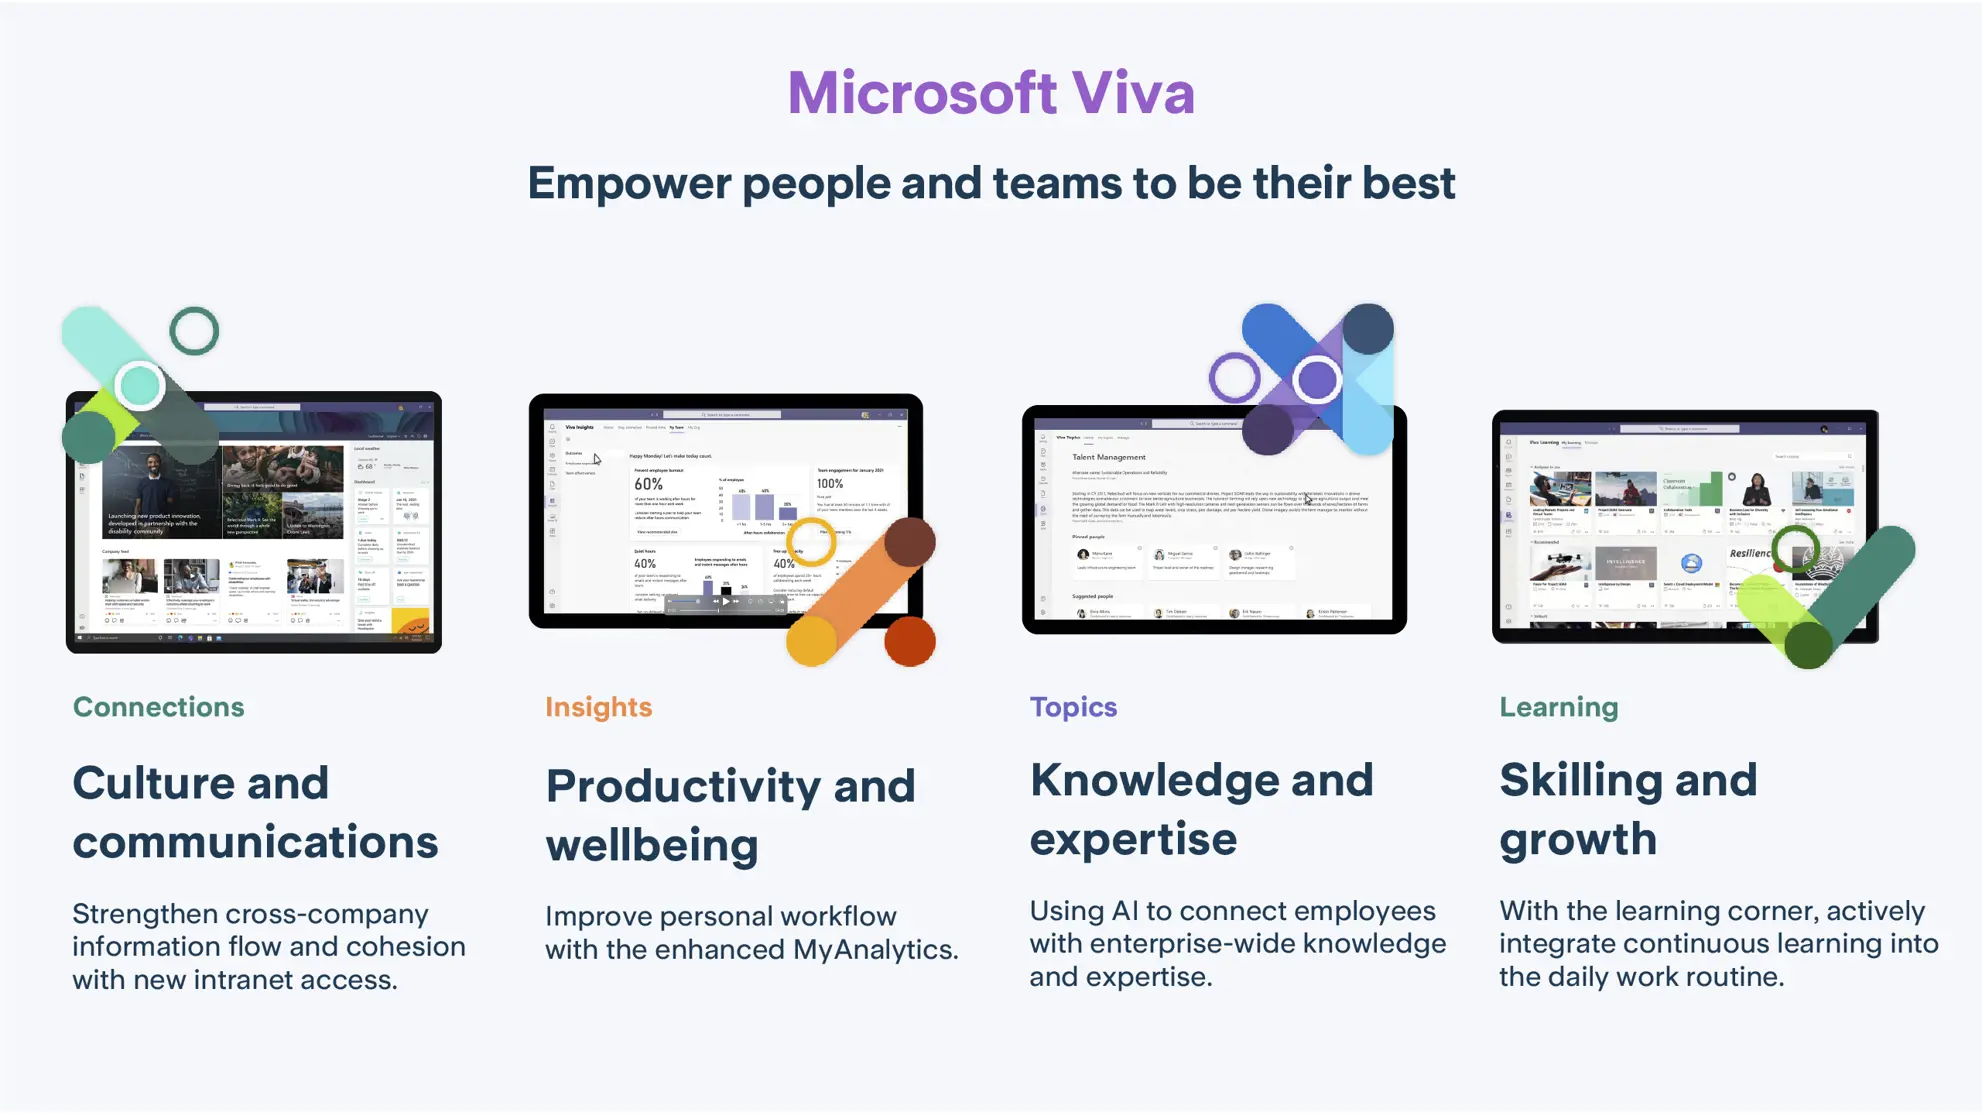 Overview and Introduction of the Microsoft Viva Components